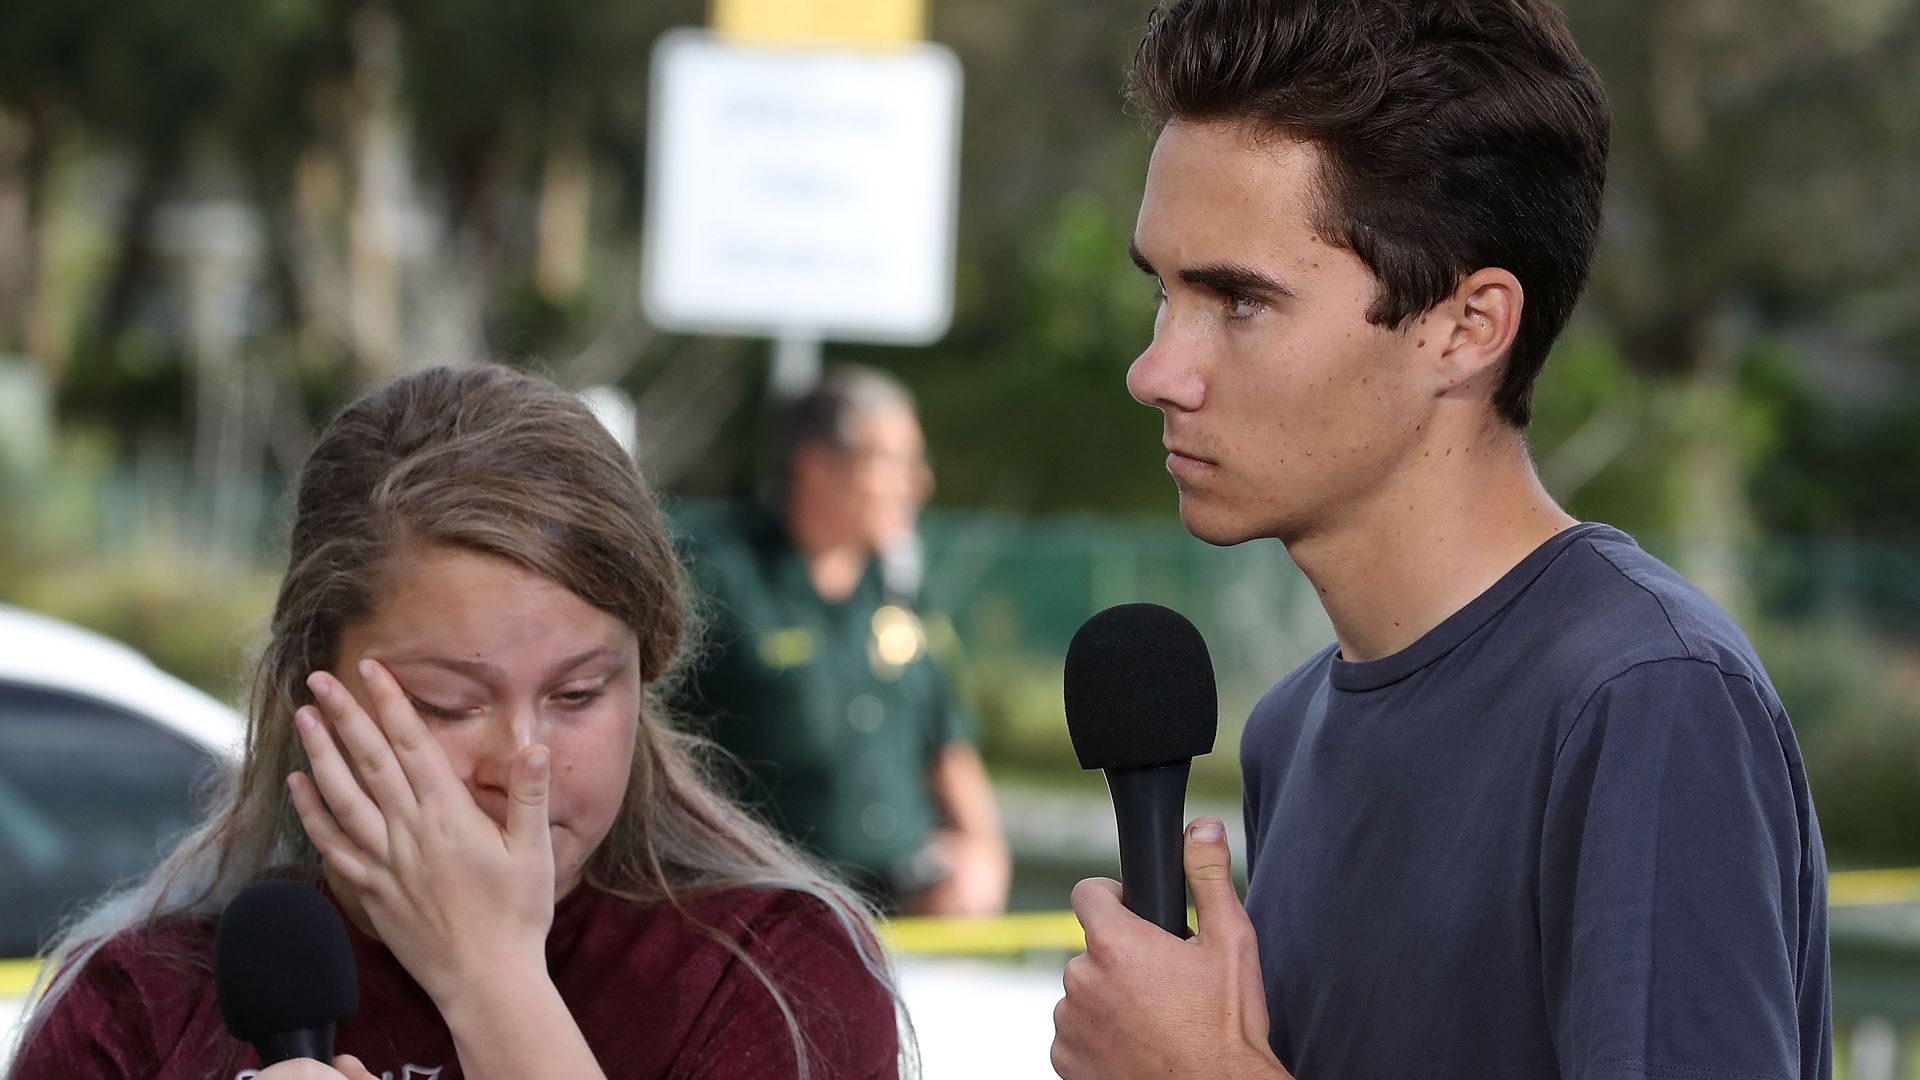 students from parkland shooting